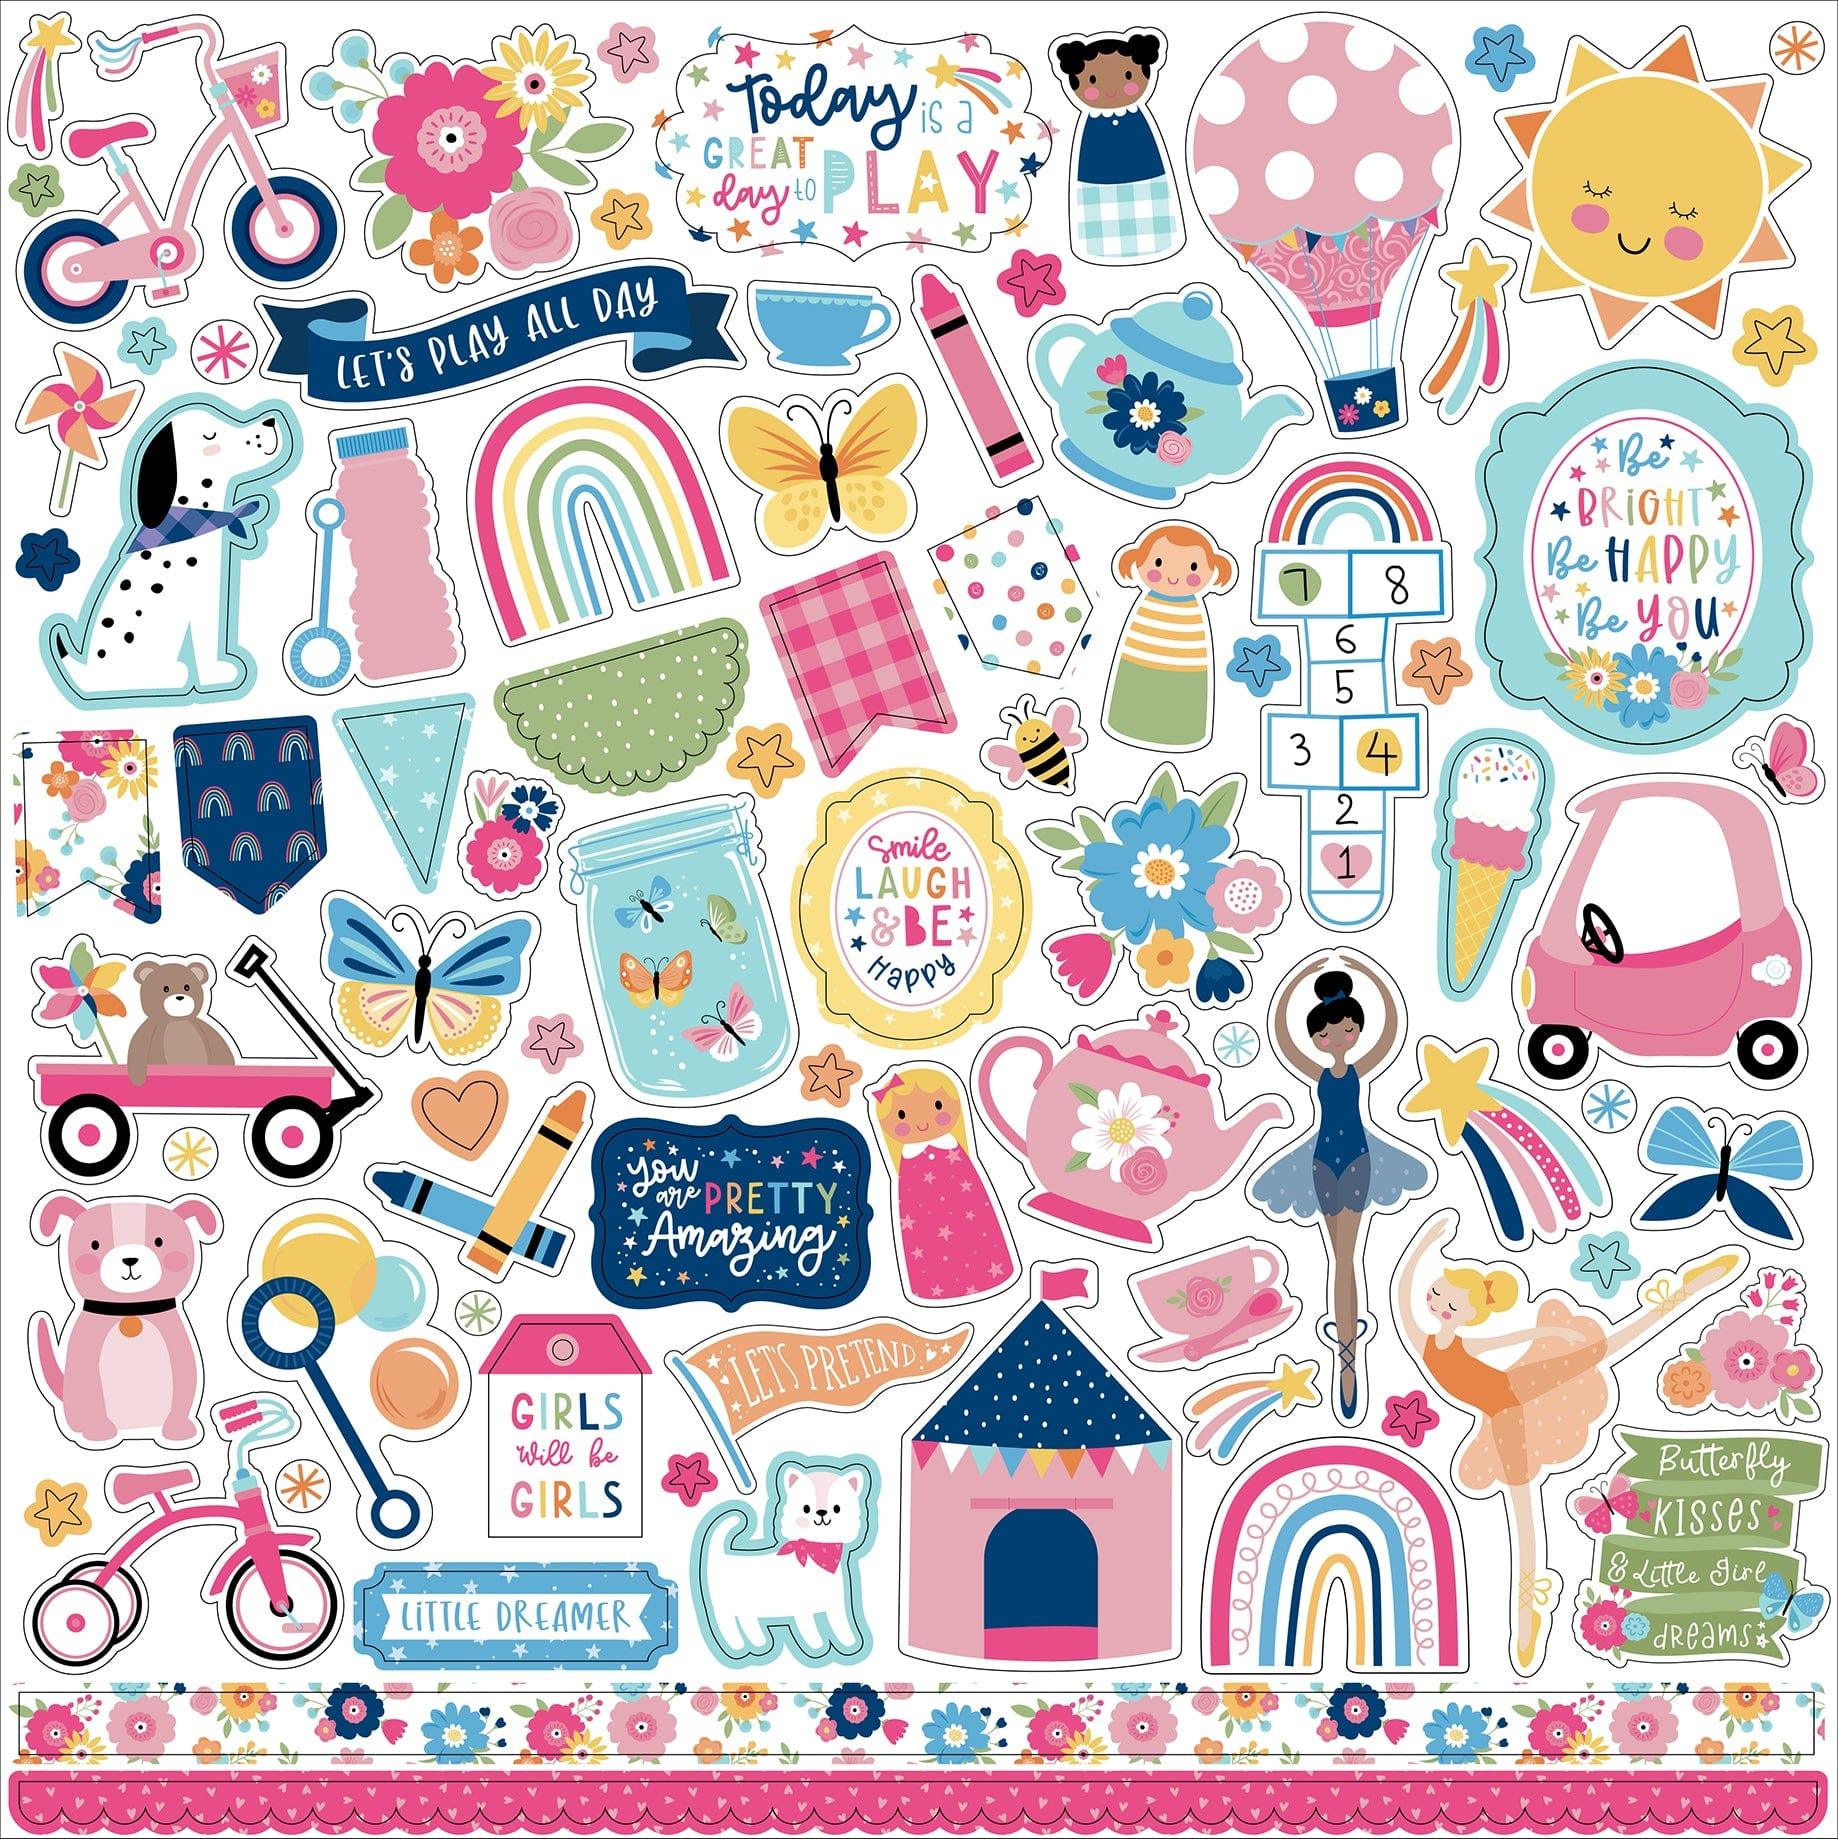 Play All Day Girl Collection 12 x 12 Scrapbook Sticker Sheet by Echo Park Paper - Scrapbook Supply Companies